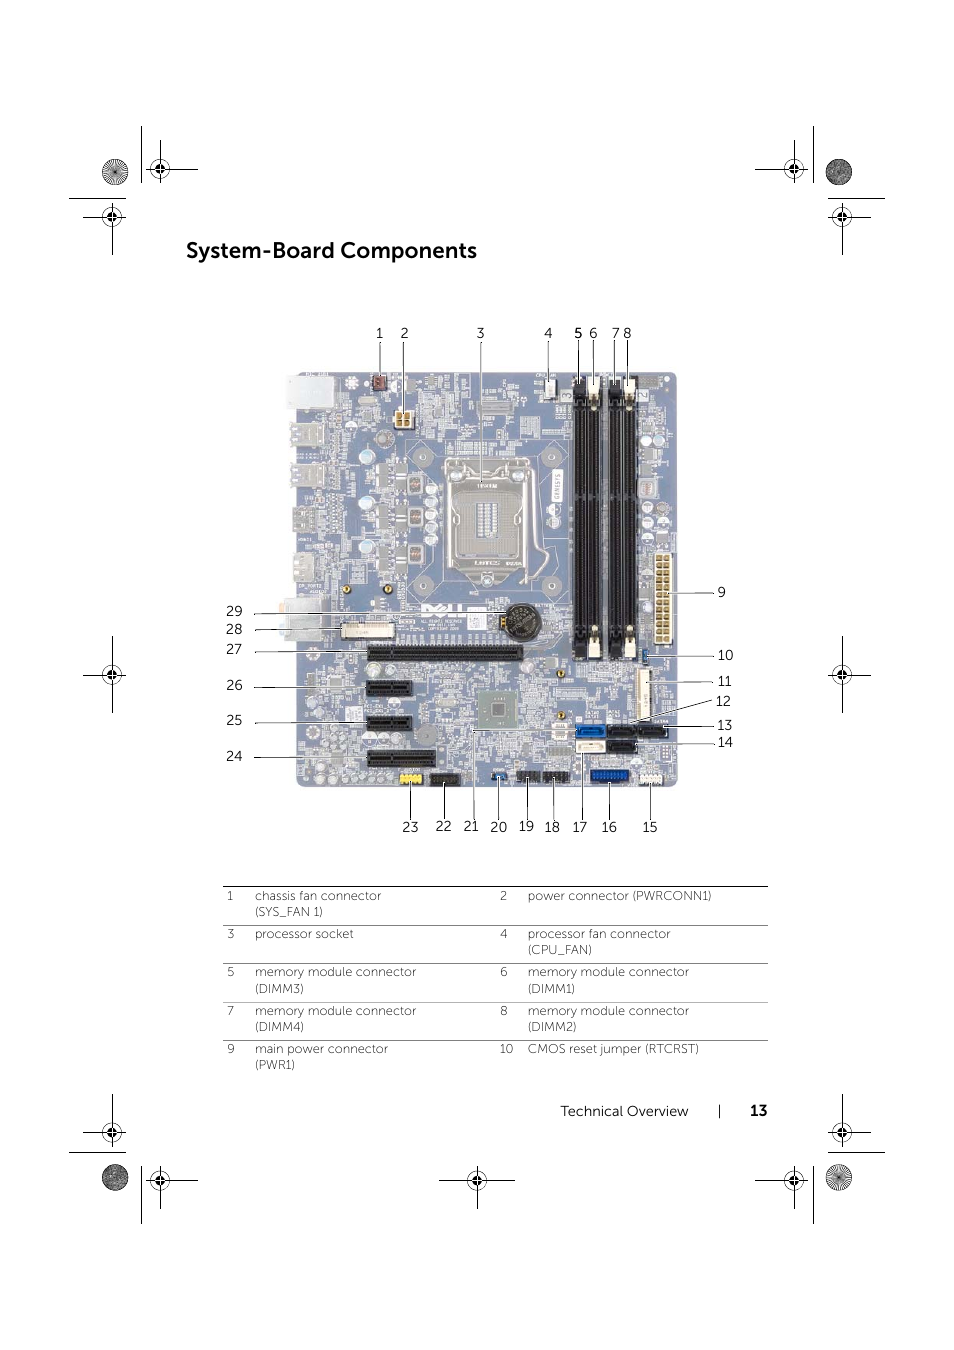 System-board components | Dell XPS 8700 (Mid 2013) User Manual | Page 13 /  86